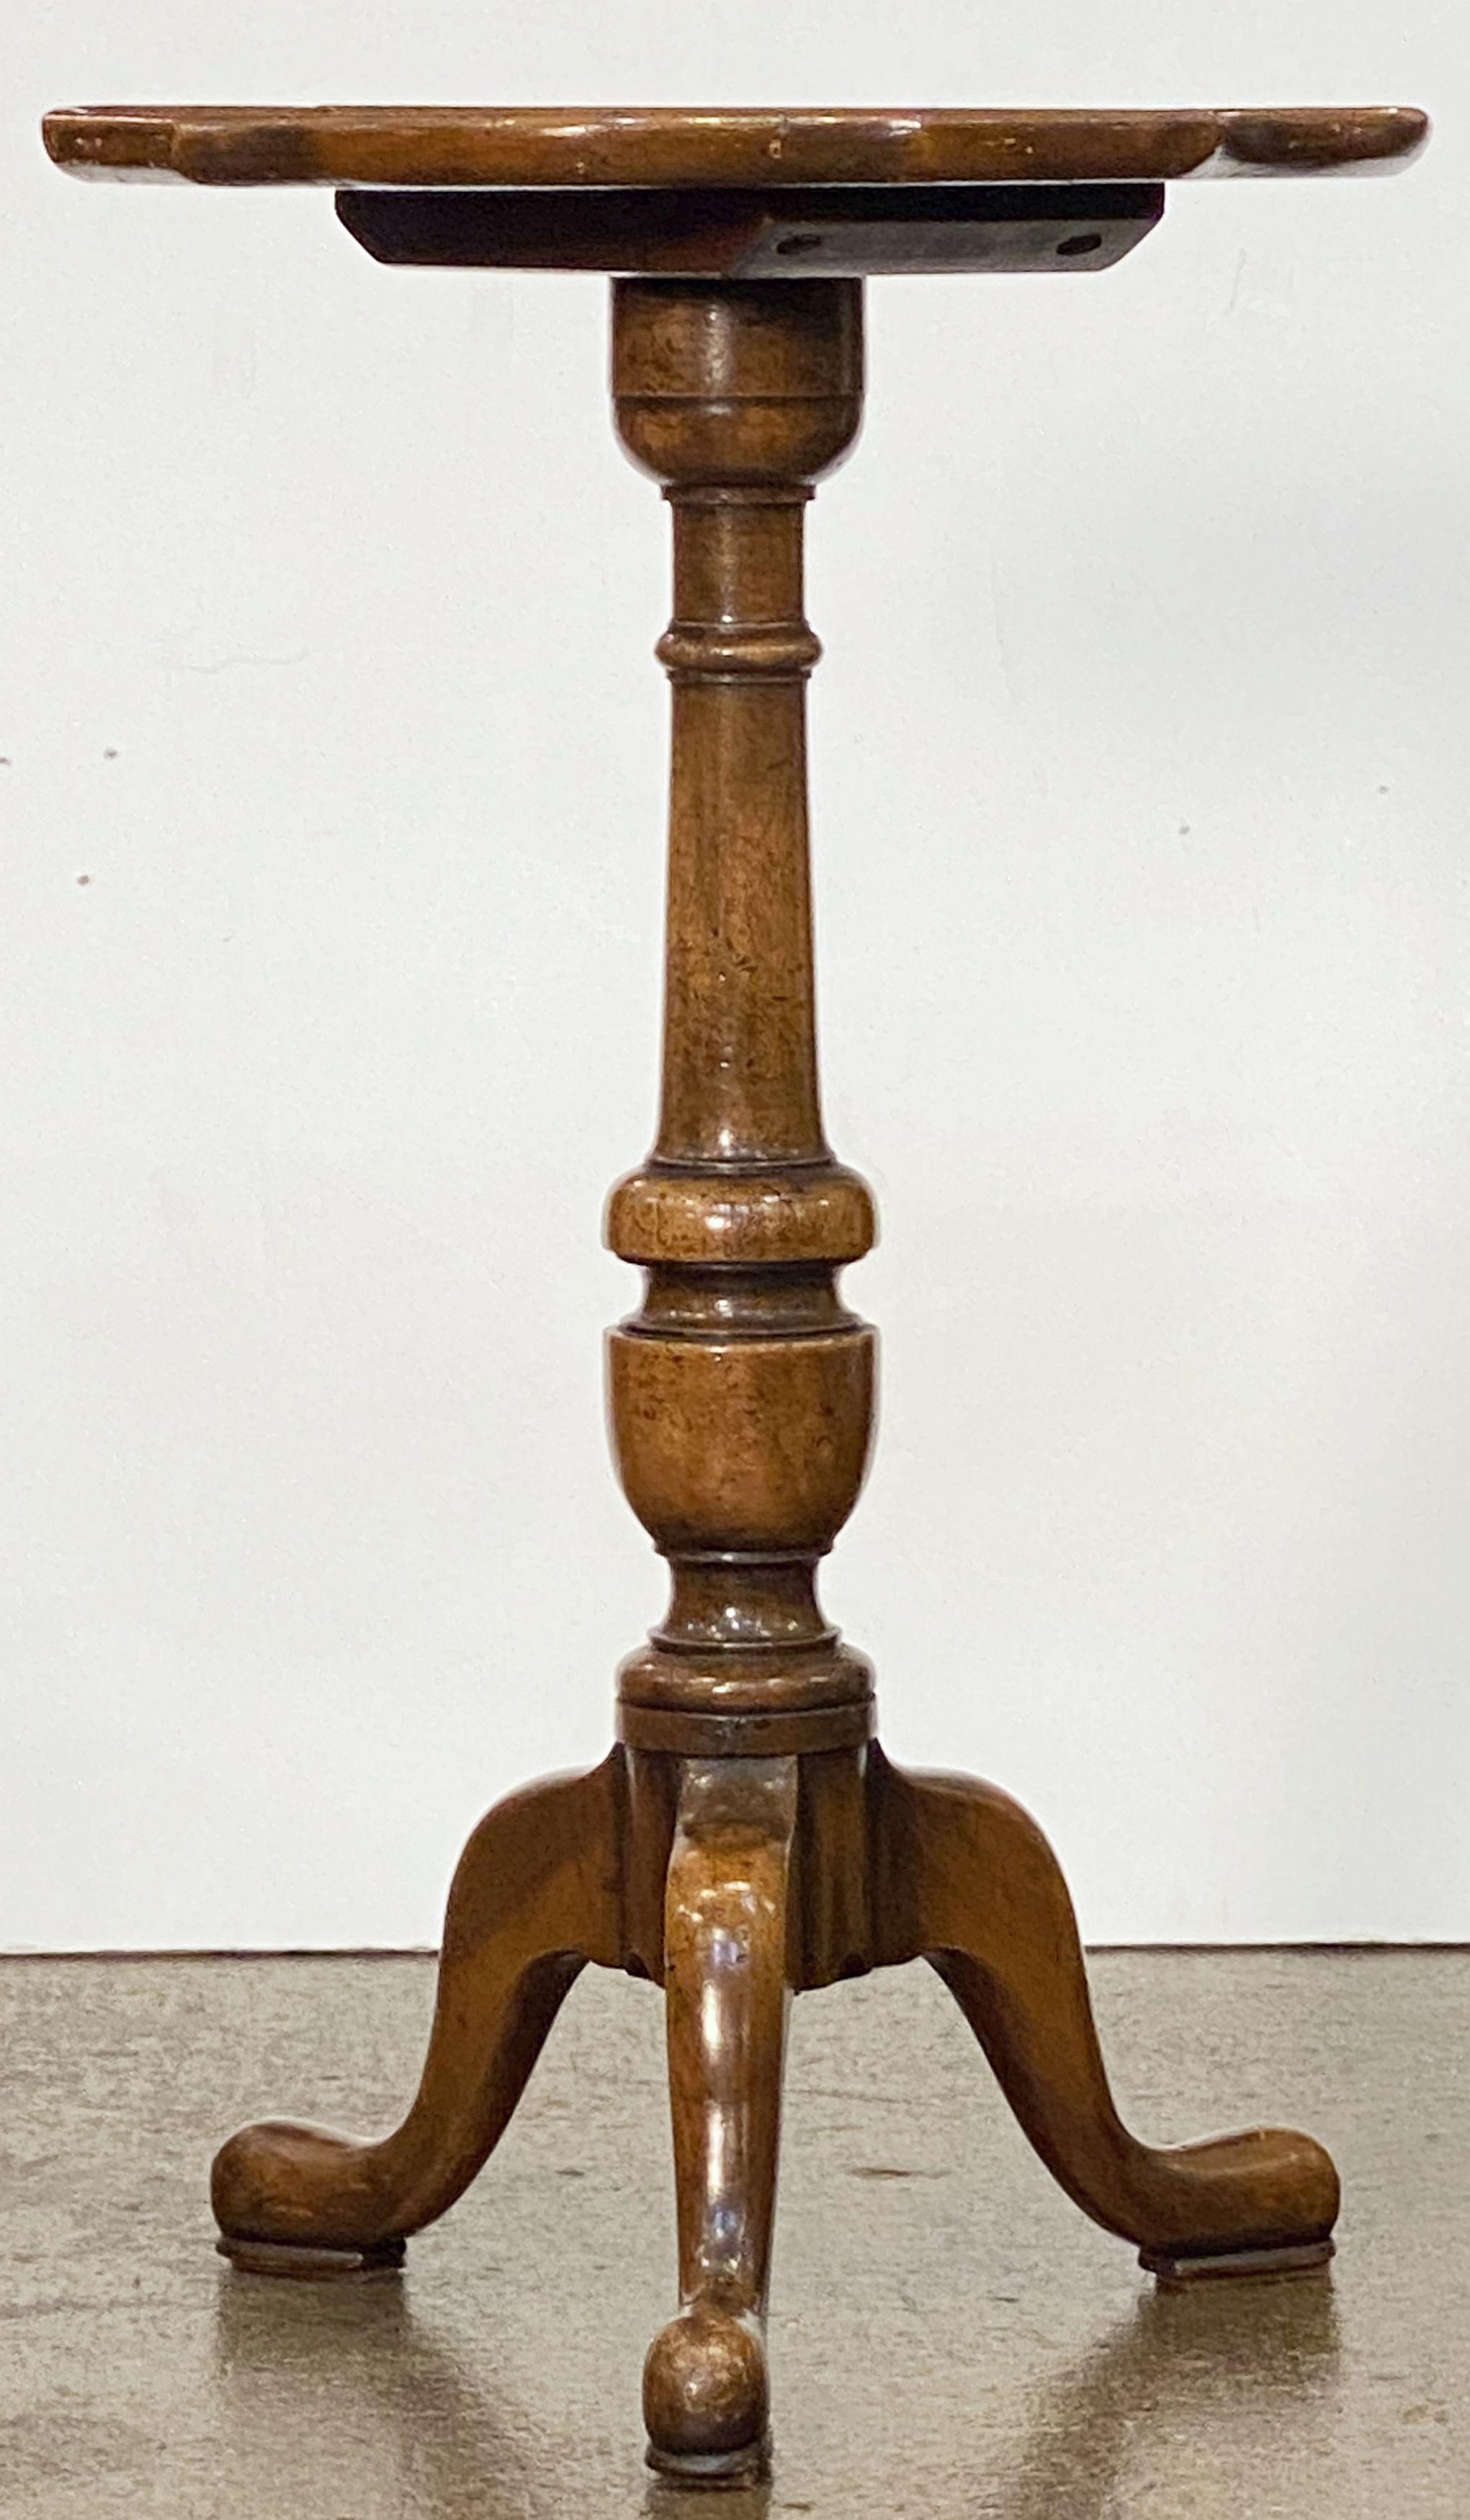 An English wine table of walnut featuring a raised edge around the circumference of the scalloped, moulded burr walnut top, mounted upon a turned column pedestal with tripod base.

An excellent choice as a side table or for serving.